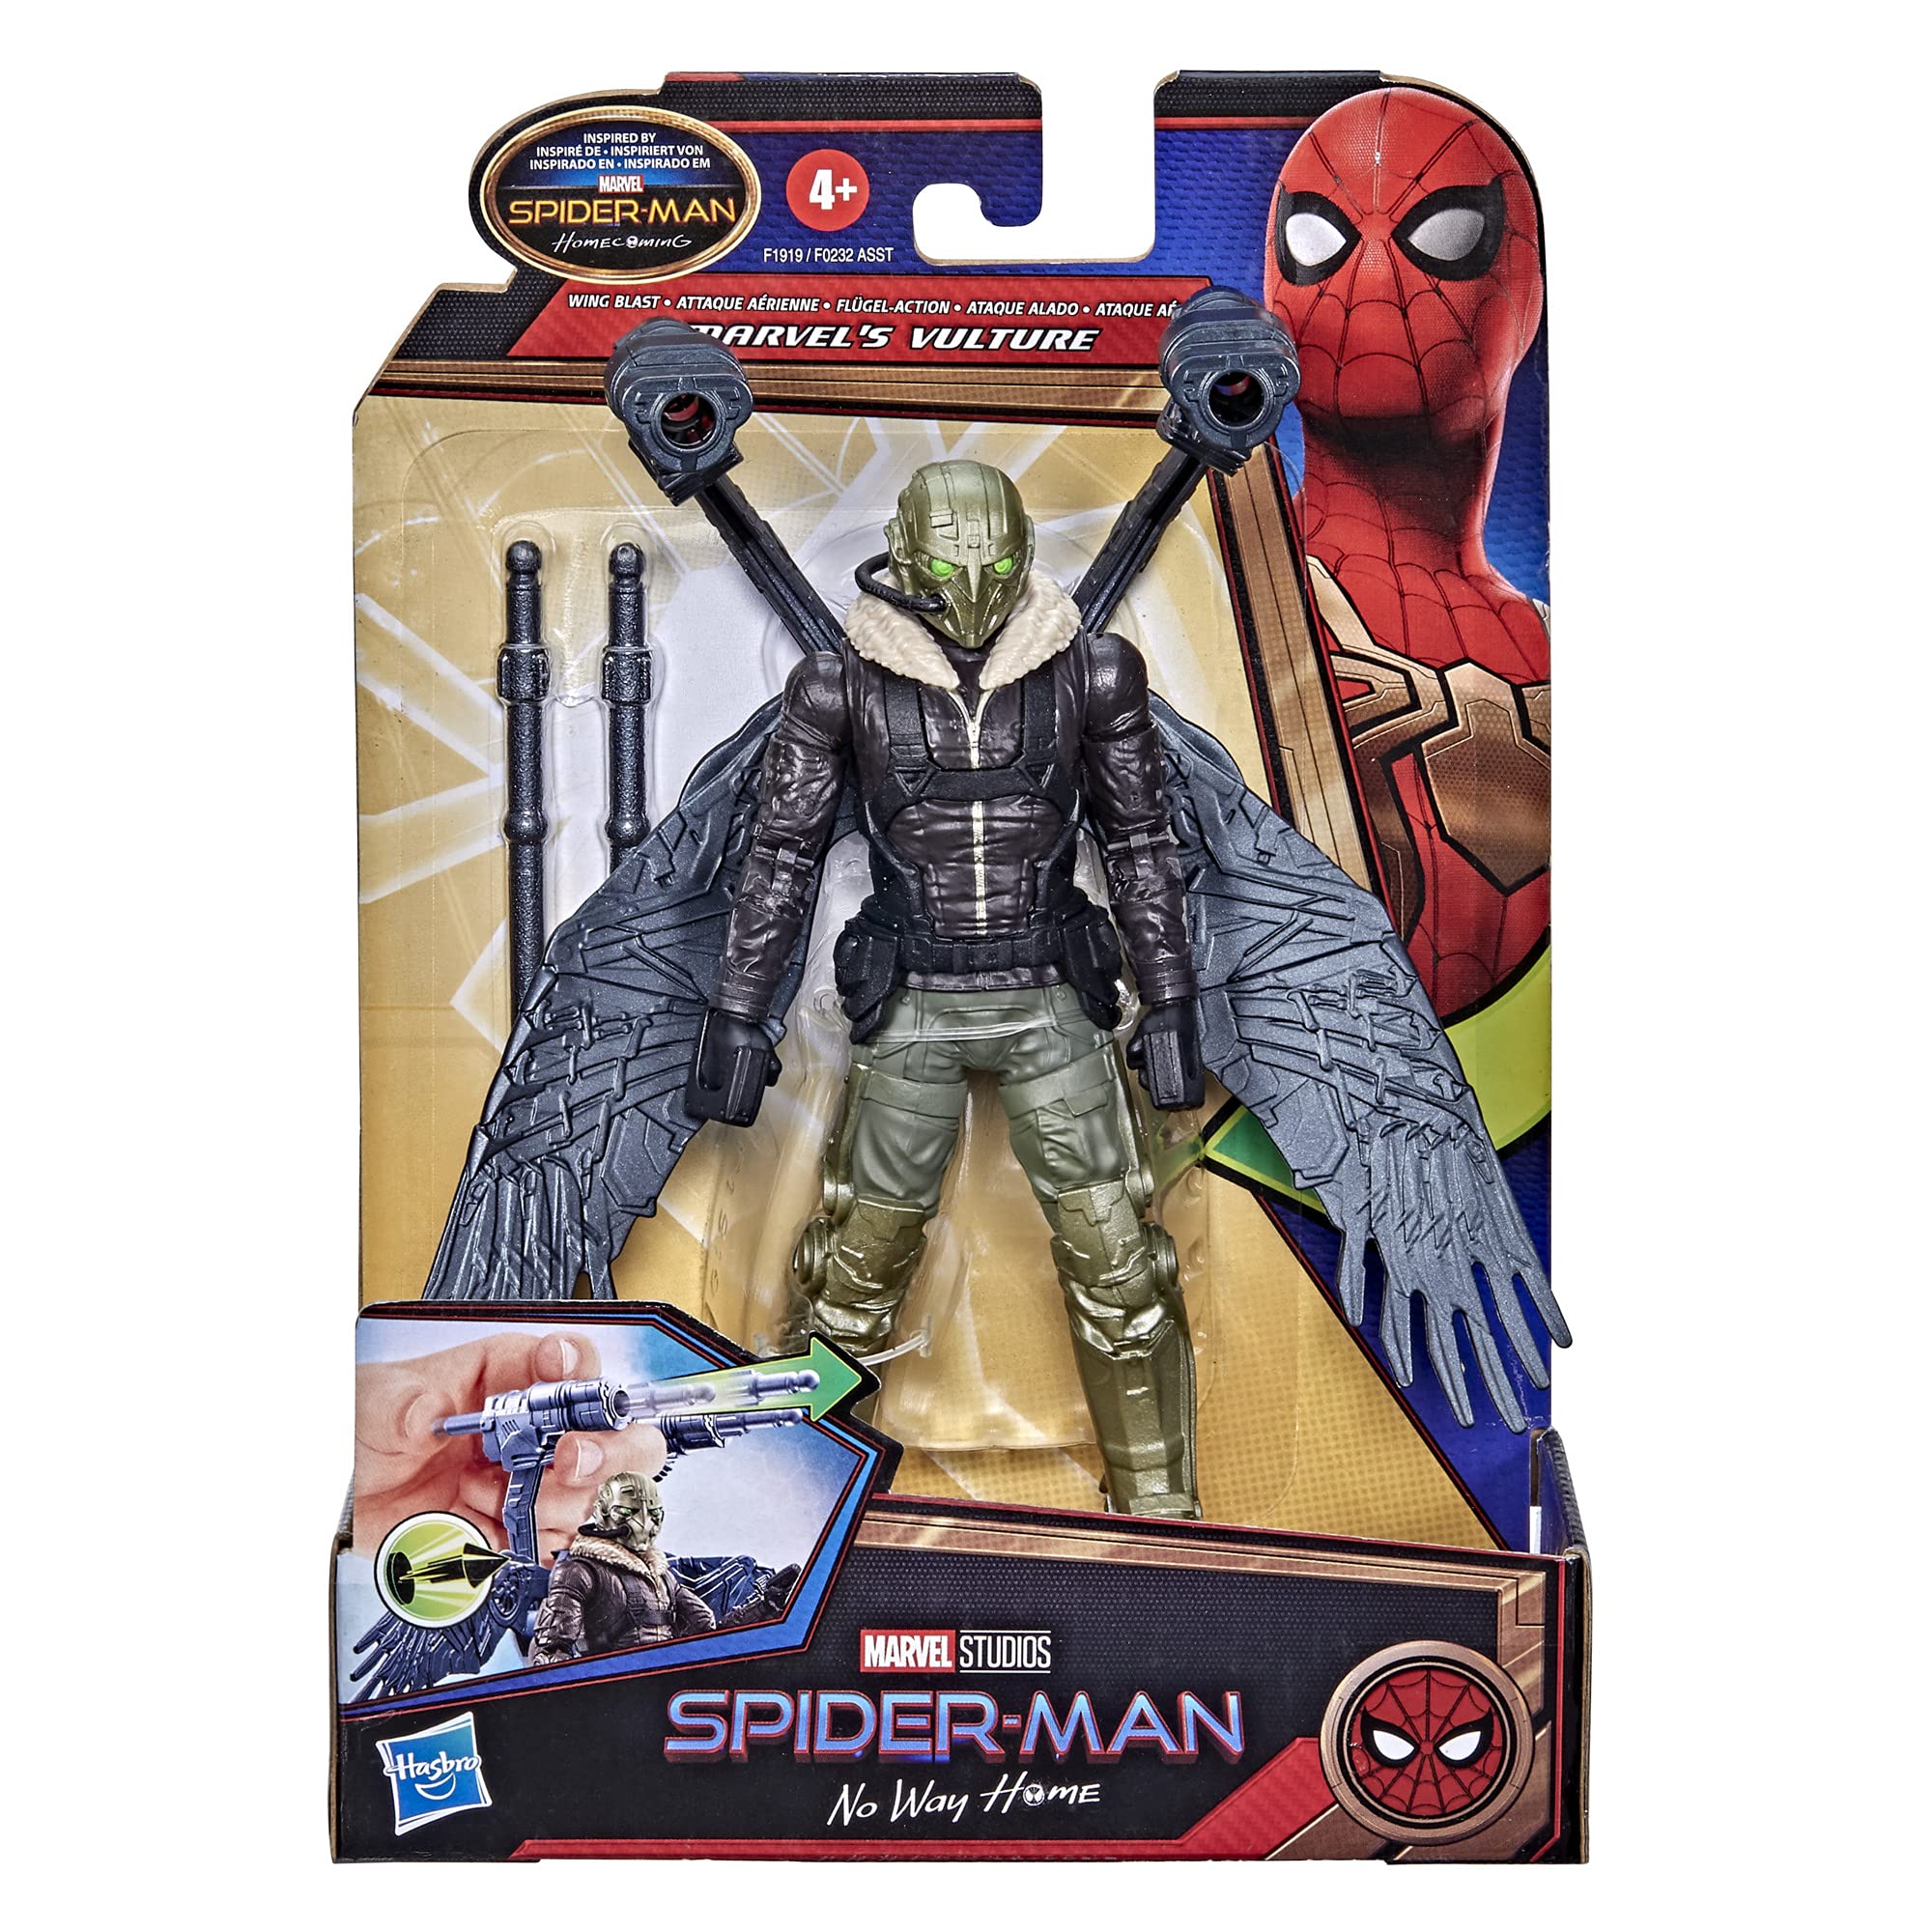 Mua Spider-Man Marvel 6-Inch Deluxe Wing Blast Marvel's Vulture,  Movie-Inspired Action Figure Toy, Blasts Included Projectiles, Ages 4 and  Up trên Amazon Mỹ chính hãng 2023 | Giaonhan247